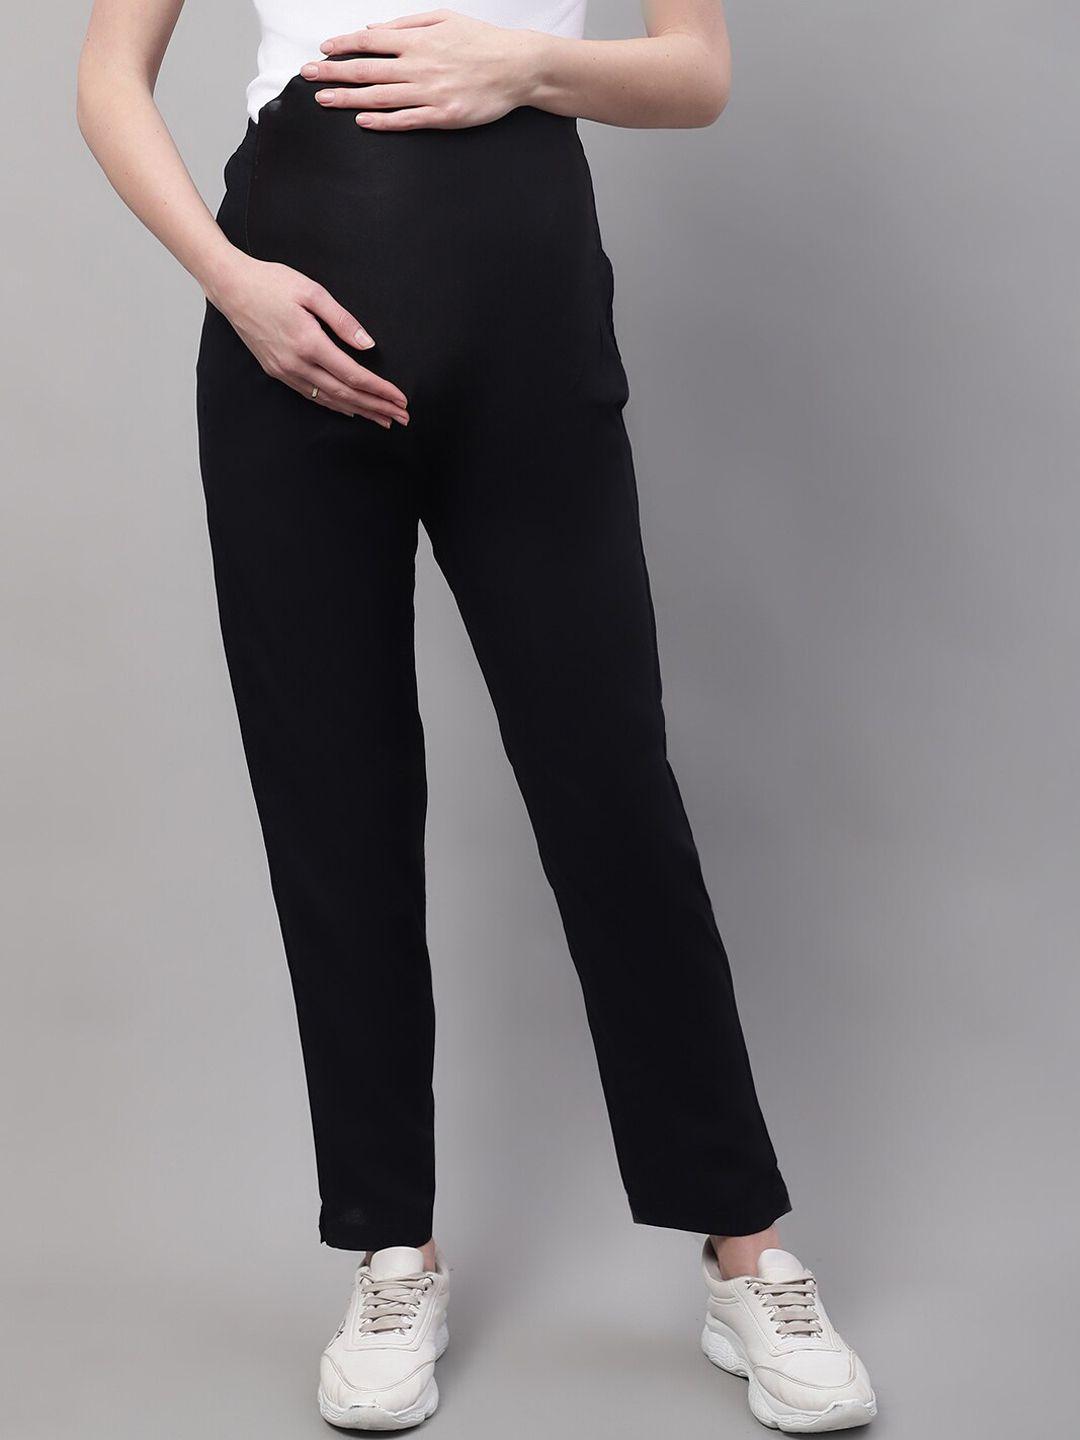 moms-maternity-women-relaxed-mom-fit-maternity-trousers